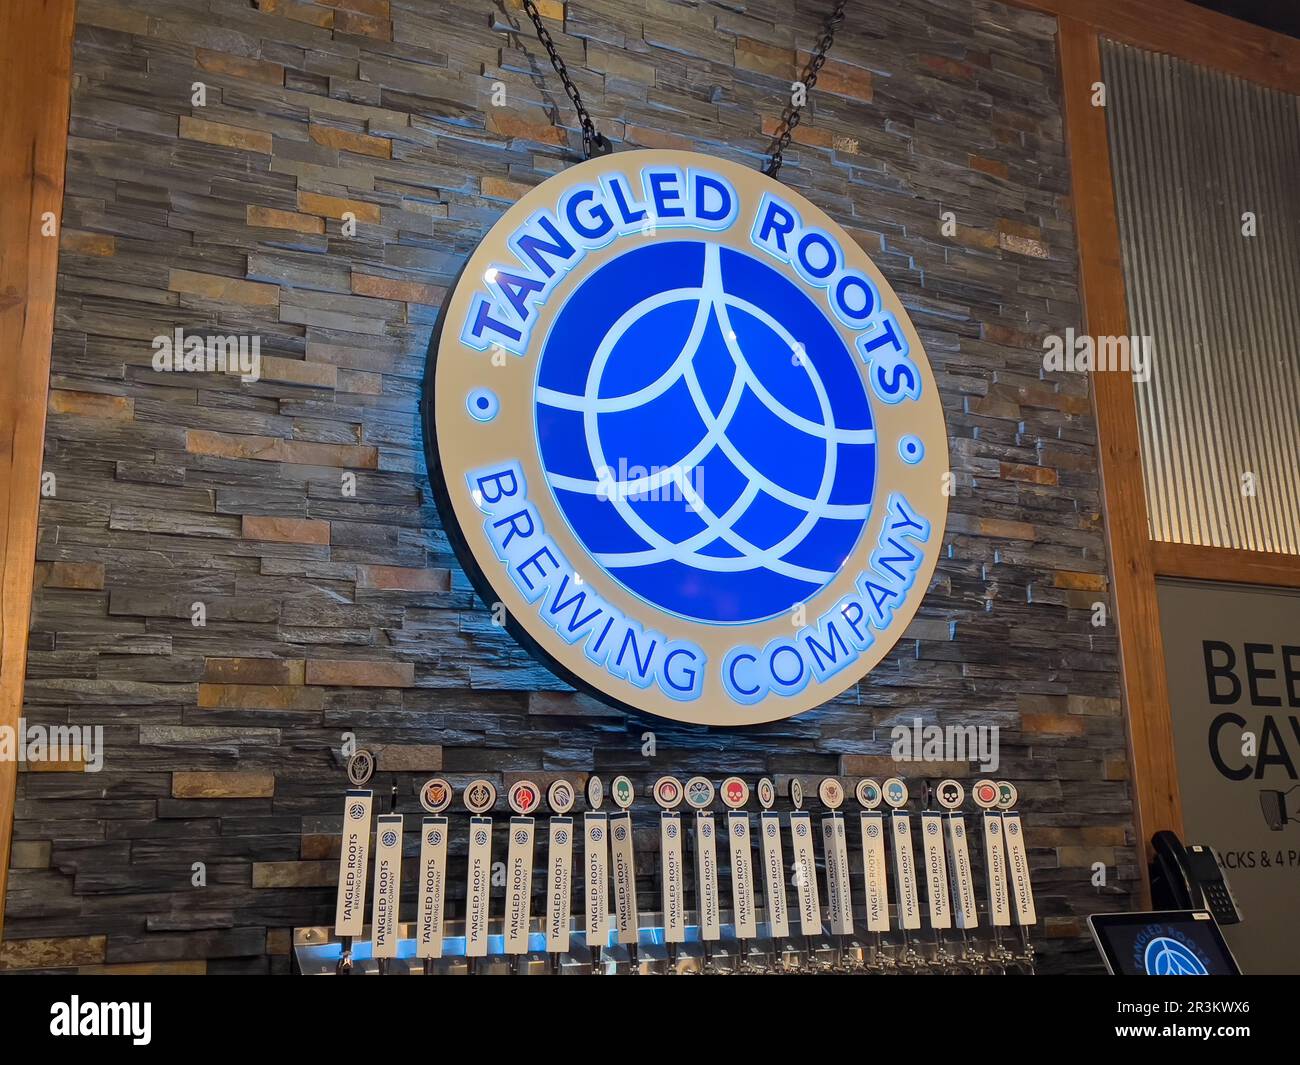 Tangled Roots is a craft beer brewing company that creates fresh products from their local farm. Stock Photo